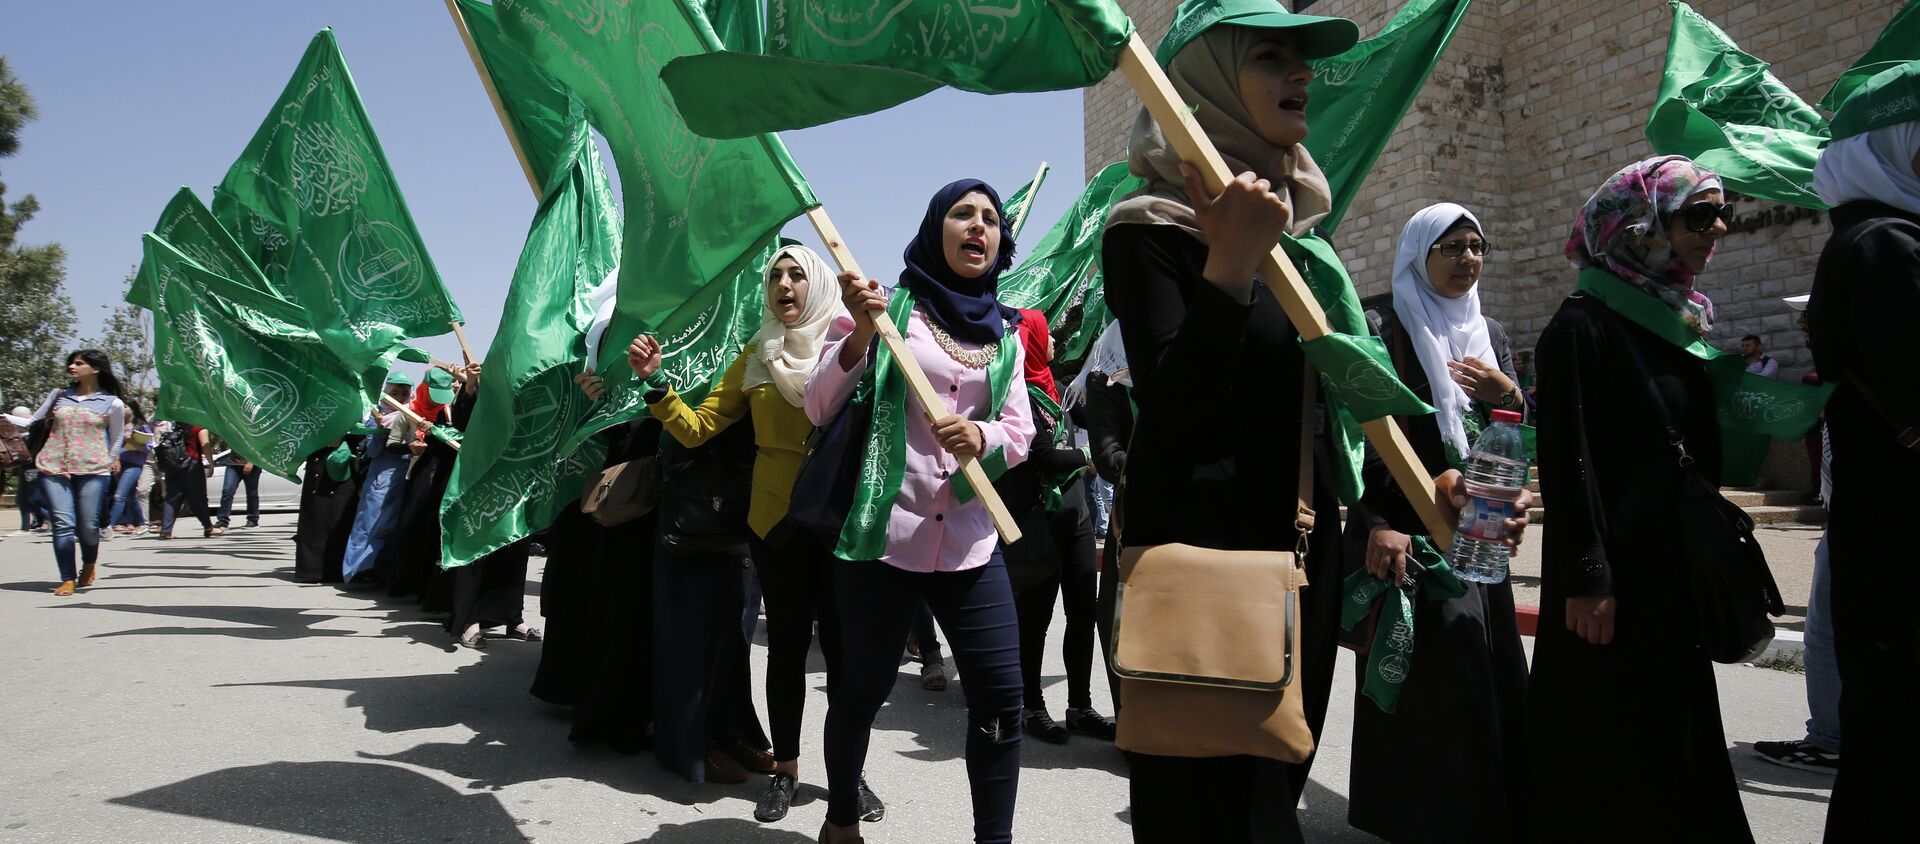 Palestinian students supporting the Hamas movement take part in a rally during an election campaign for the student council at the Birzeit University, near the West Bank city of Ramallah on April 26, 2016  - Sputnik International, 1920, 26.06.2021